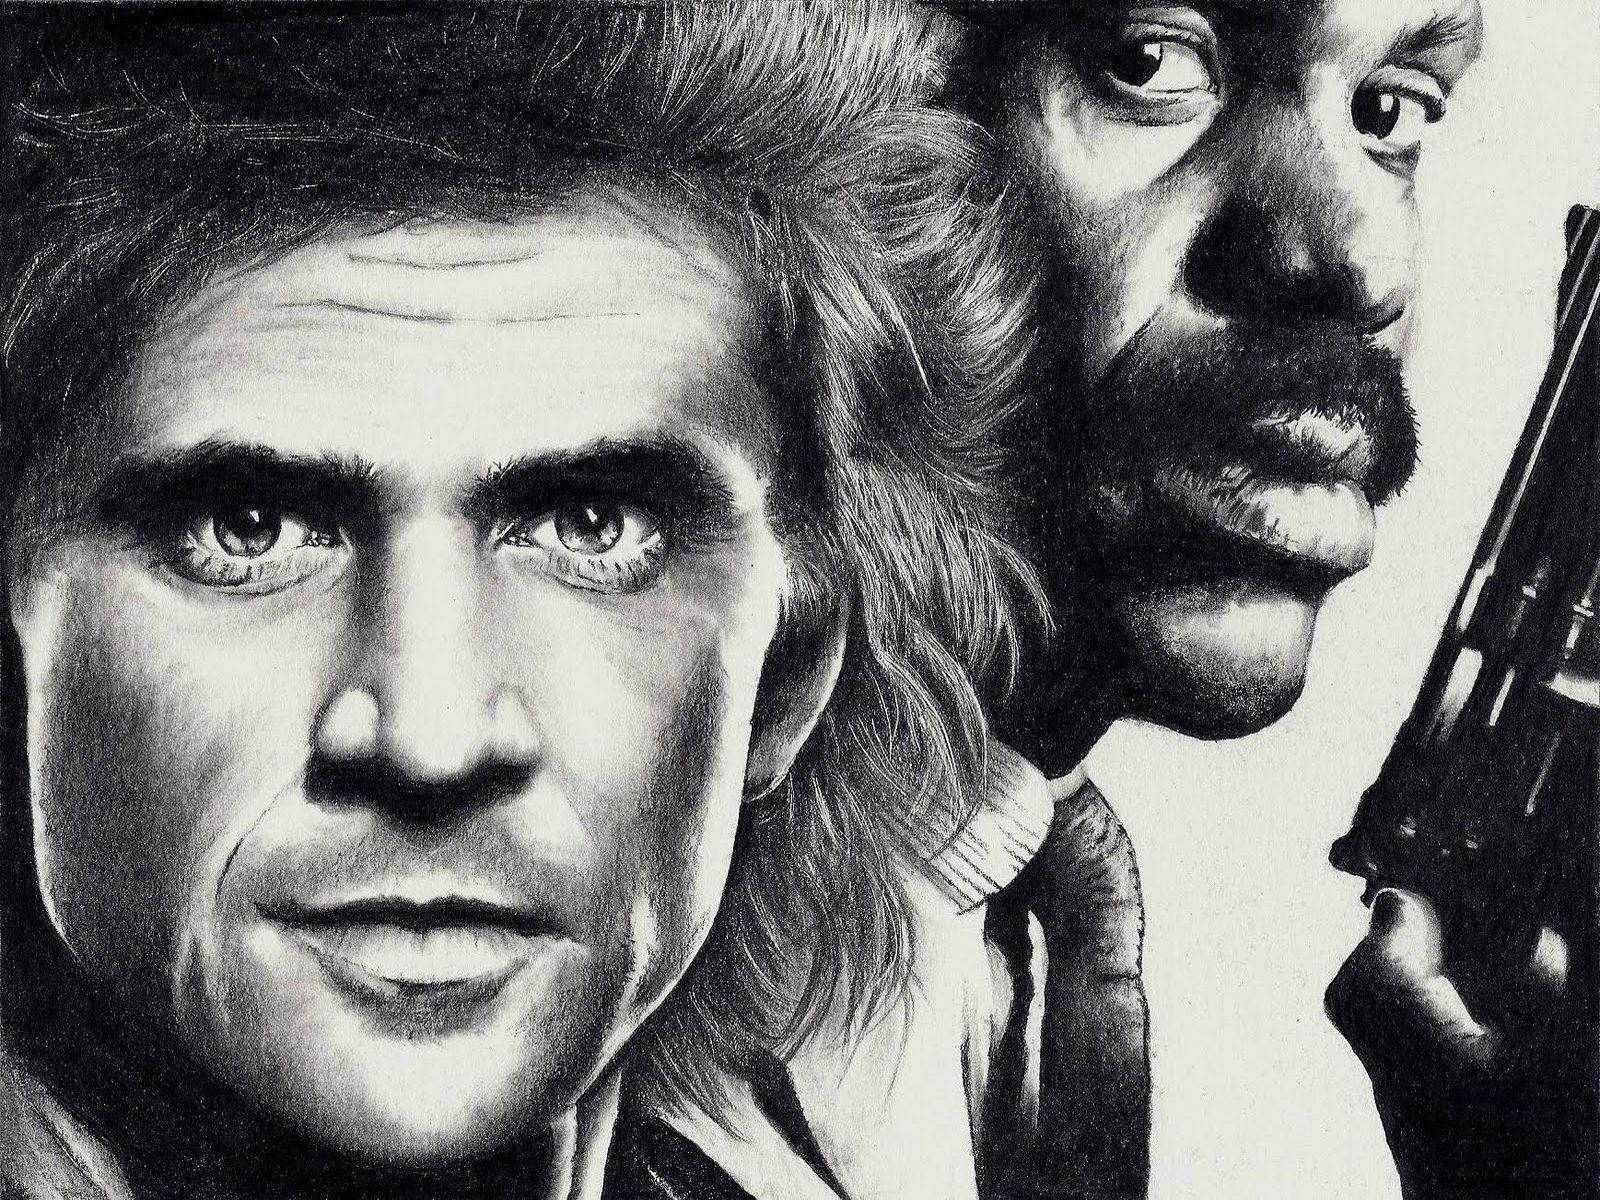 Lethal Weapon free Wallpapers (6 photos) for your desktop ...